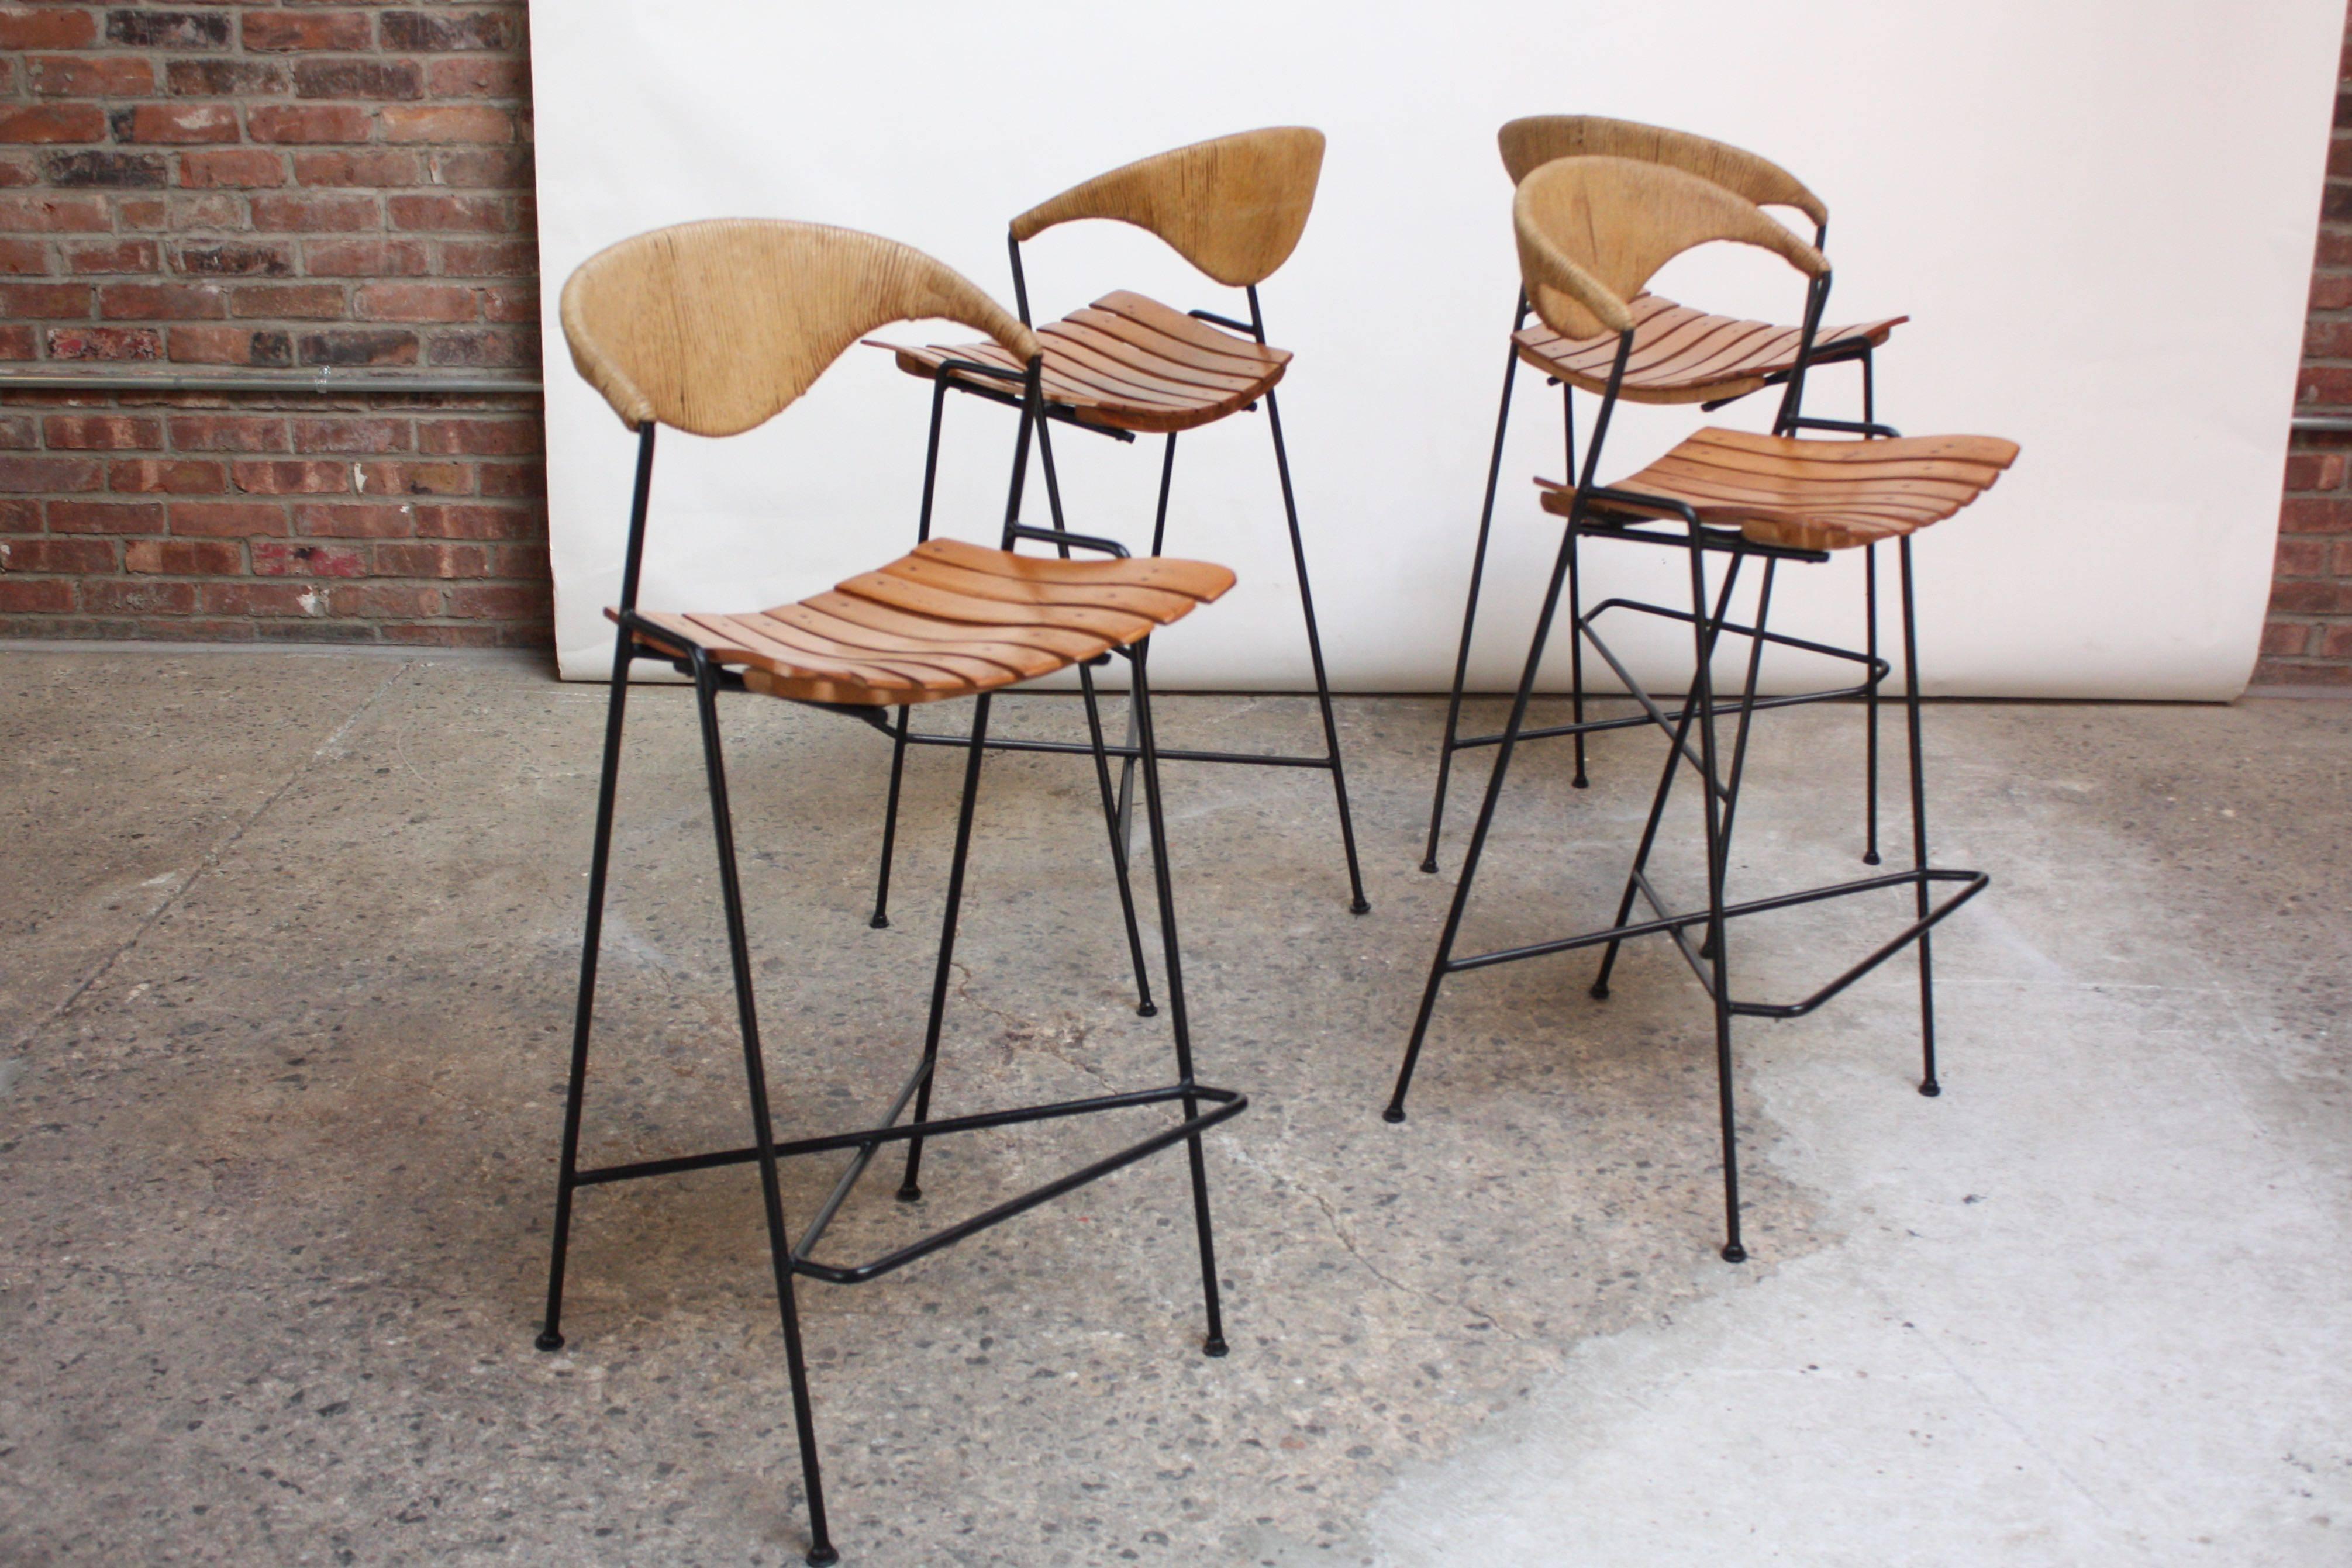 These Umanoff stools are composed of wrought iron frames, stained birch-slatted seats, and rush backs. Sculptural back and unique-form footrest add striking contrast to an otherwise modest form. 
The seat height is 29.5